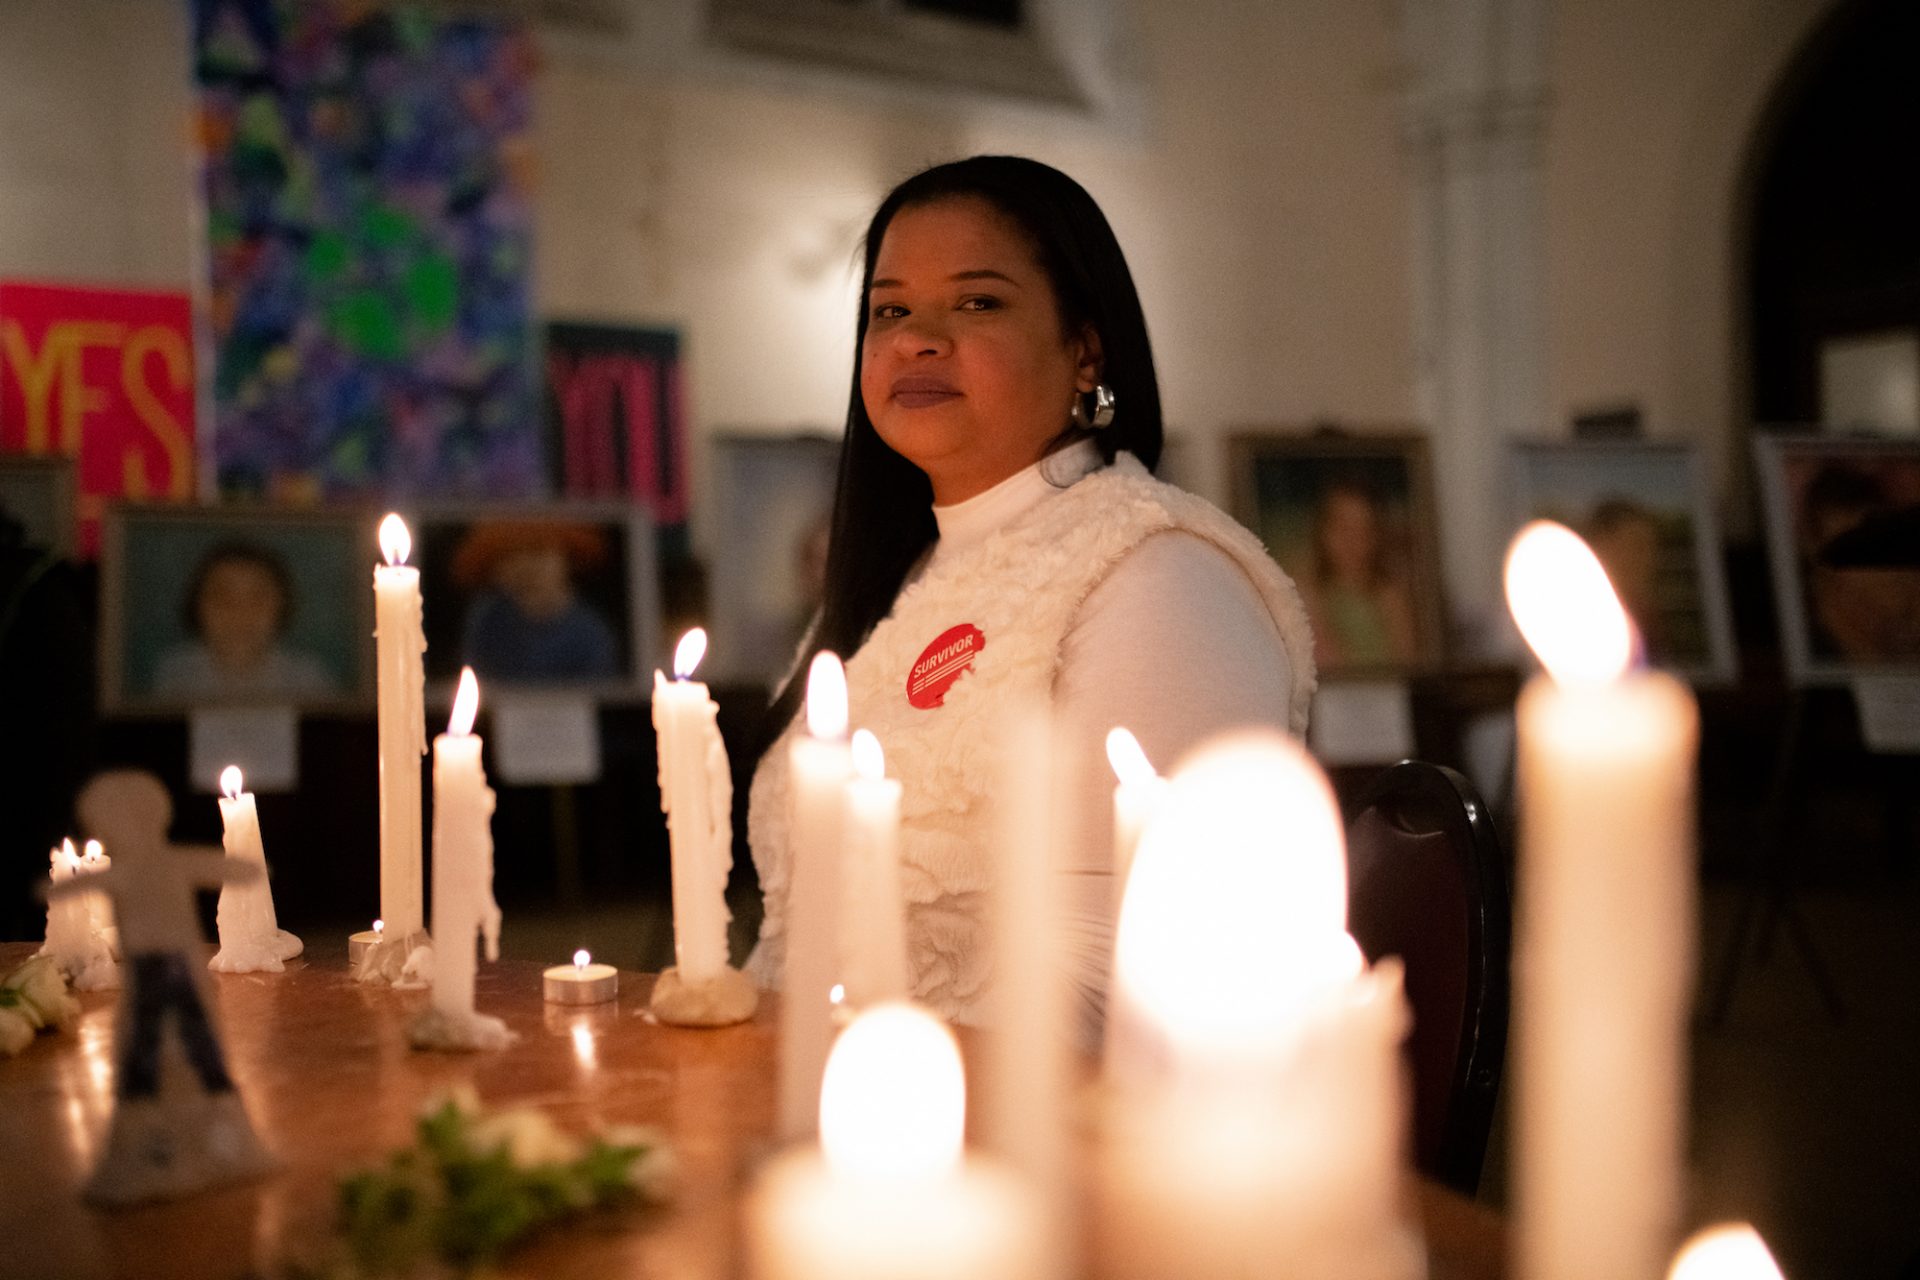 Rosalind Pichardo is surrounded by canvas portraits of the Sandy Hook victims and candles lit in remembrance of Philadelphia's own gun violence, after speaking during a vigil held at Broad Street Ministry. Pichardo lost her brother, sister and boyfriend to gun violence, in addition to her father, who took his own life after losing two of his children.